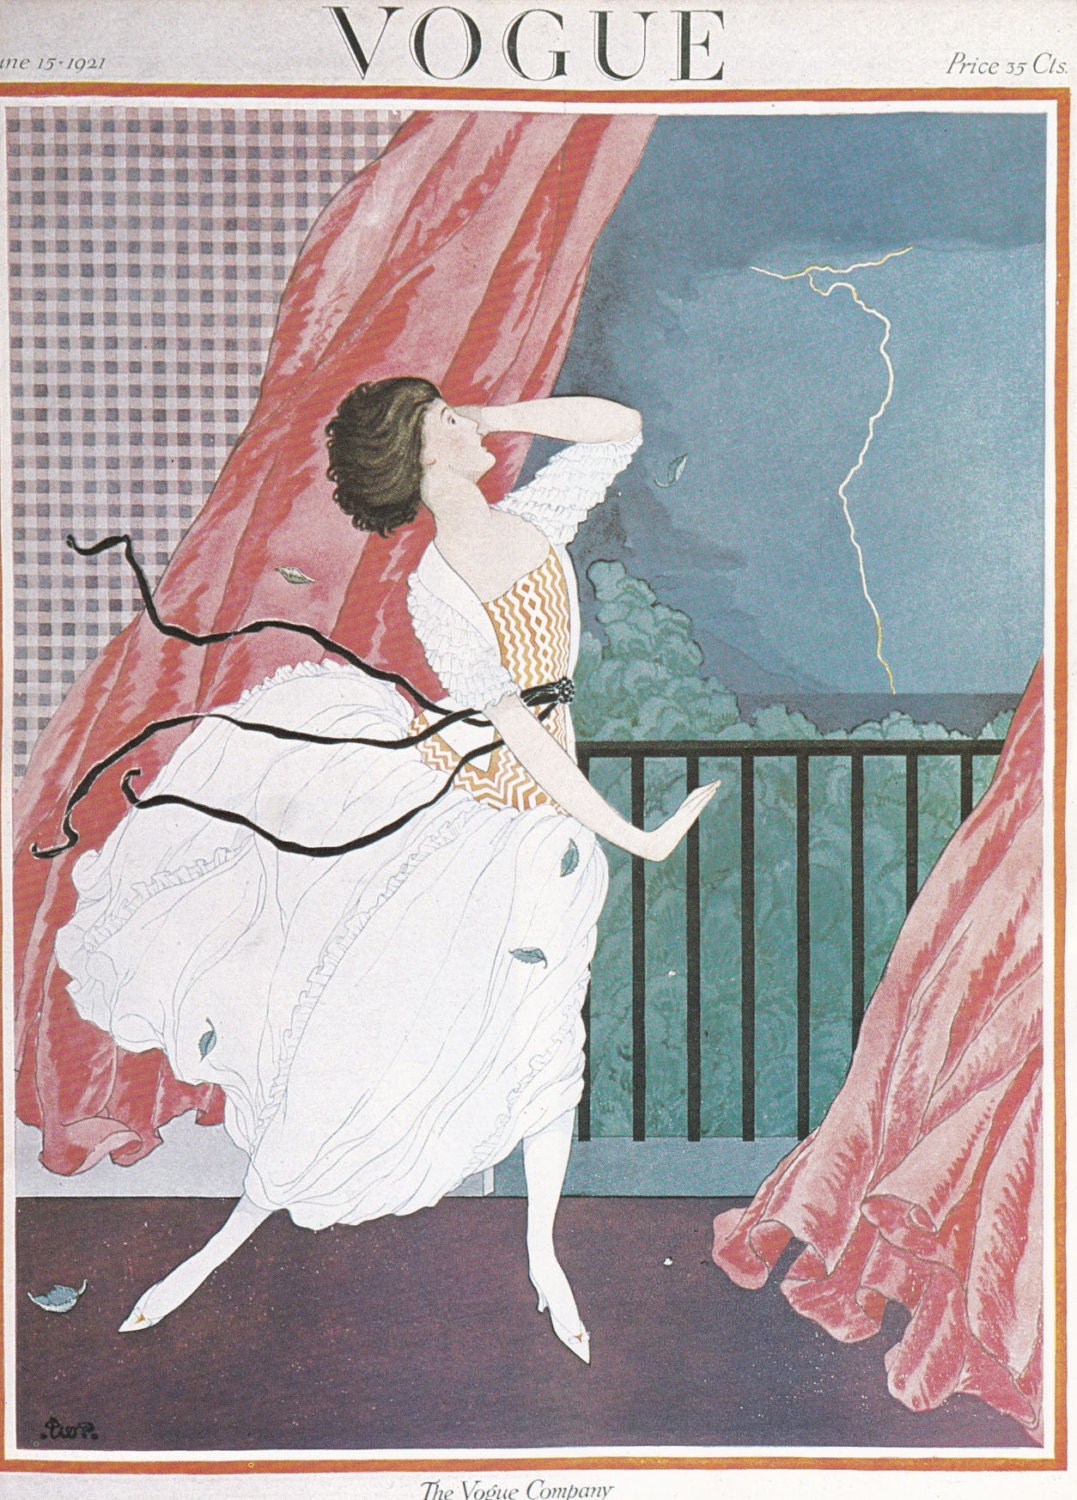 A Vogue Cover Of A Woman Reading A Vogue Book by George Wolfe Plank